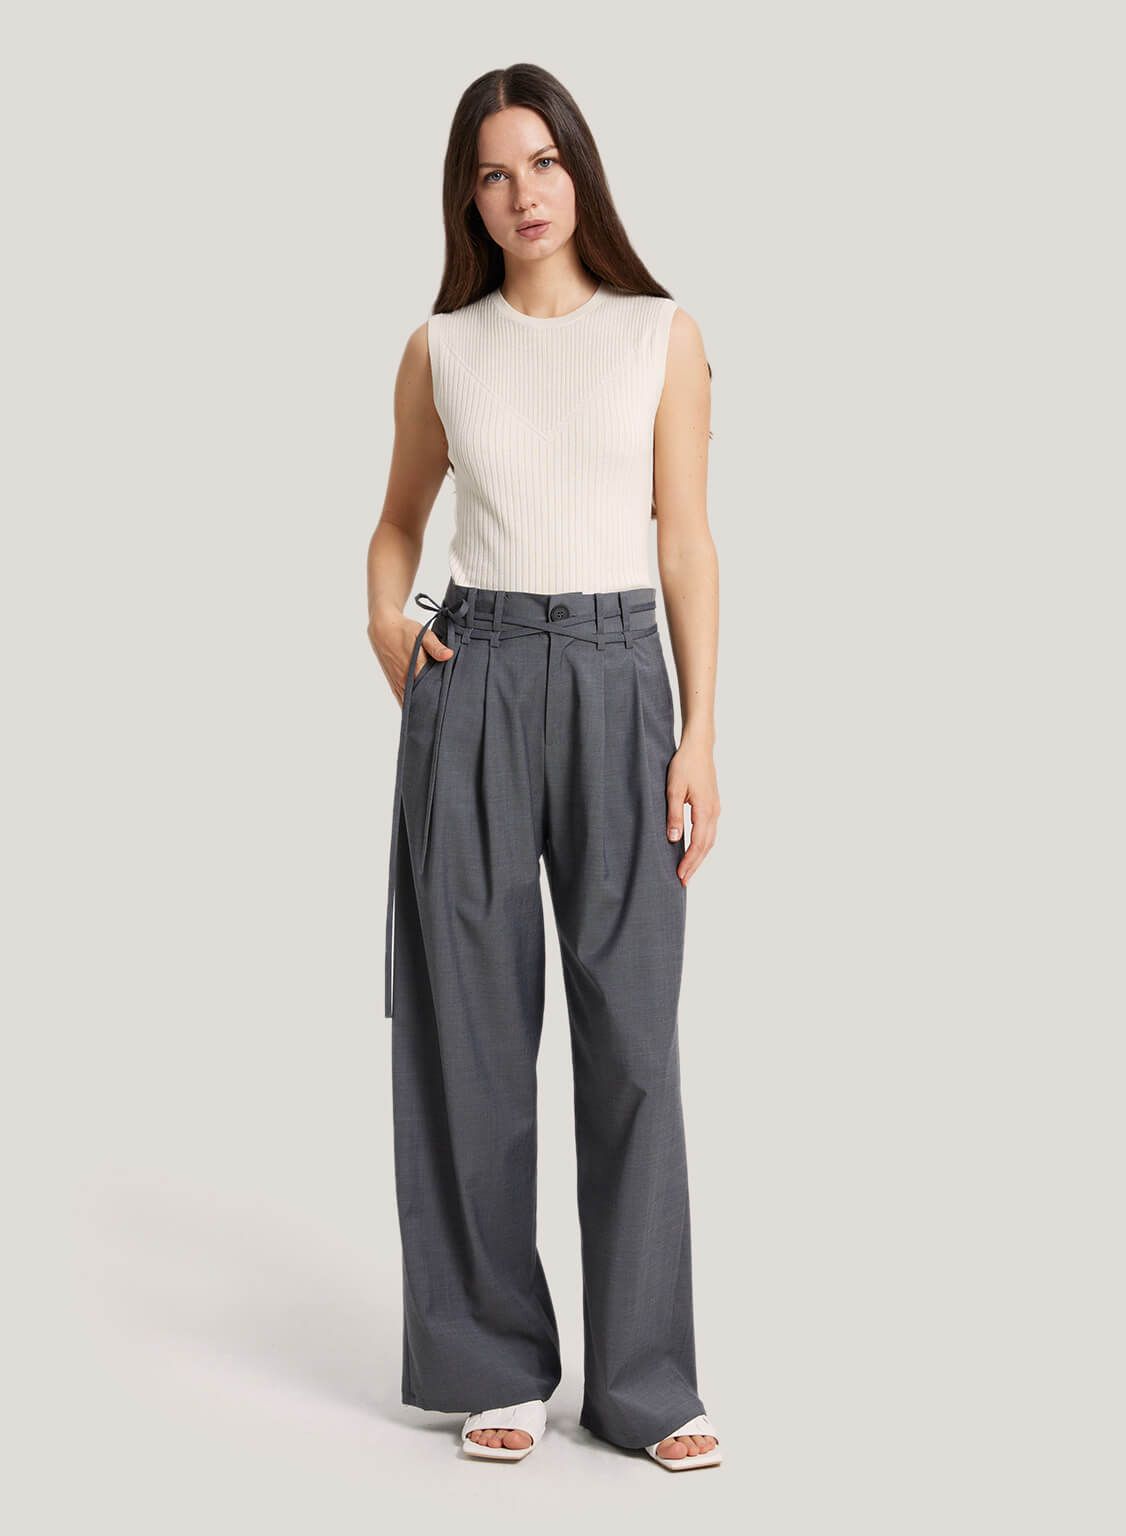 These pants are made from a wool blend fabric. The pants feature a high-rise, a tie detail at the... | Gentle Herd